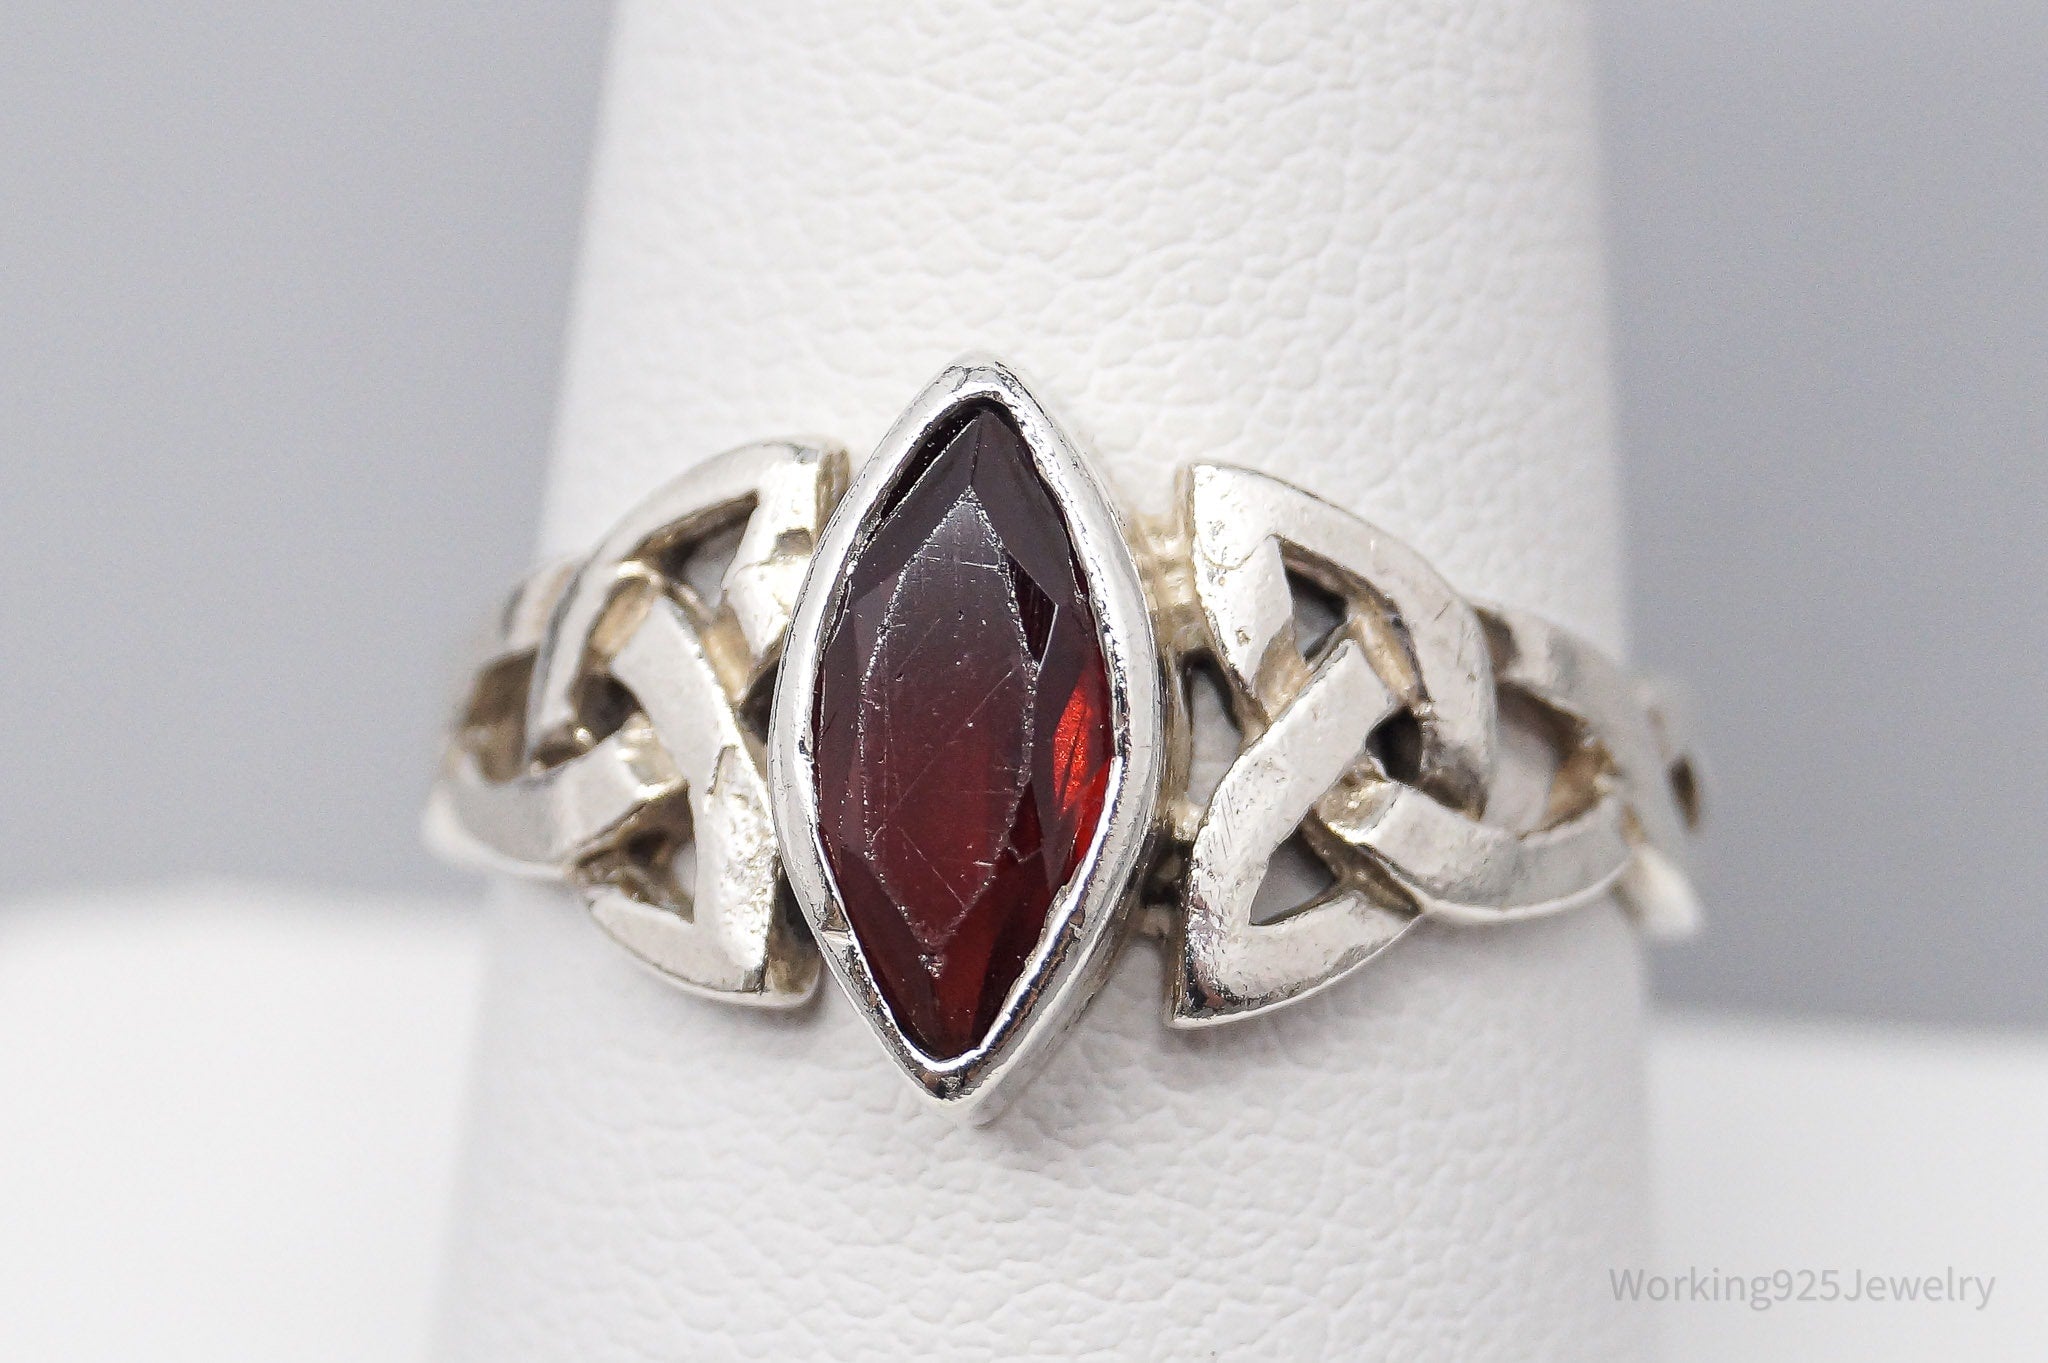 Vintage Garnet Triquetra Trinity Knot Sterling Silver Ring - Size 9